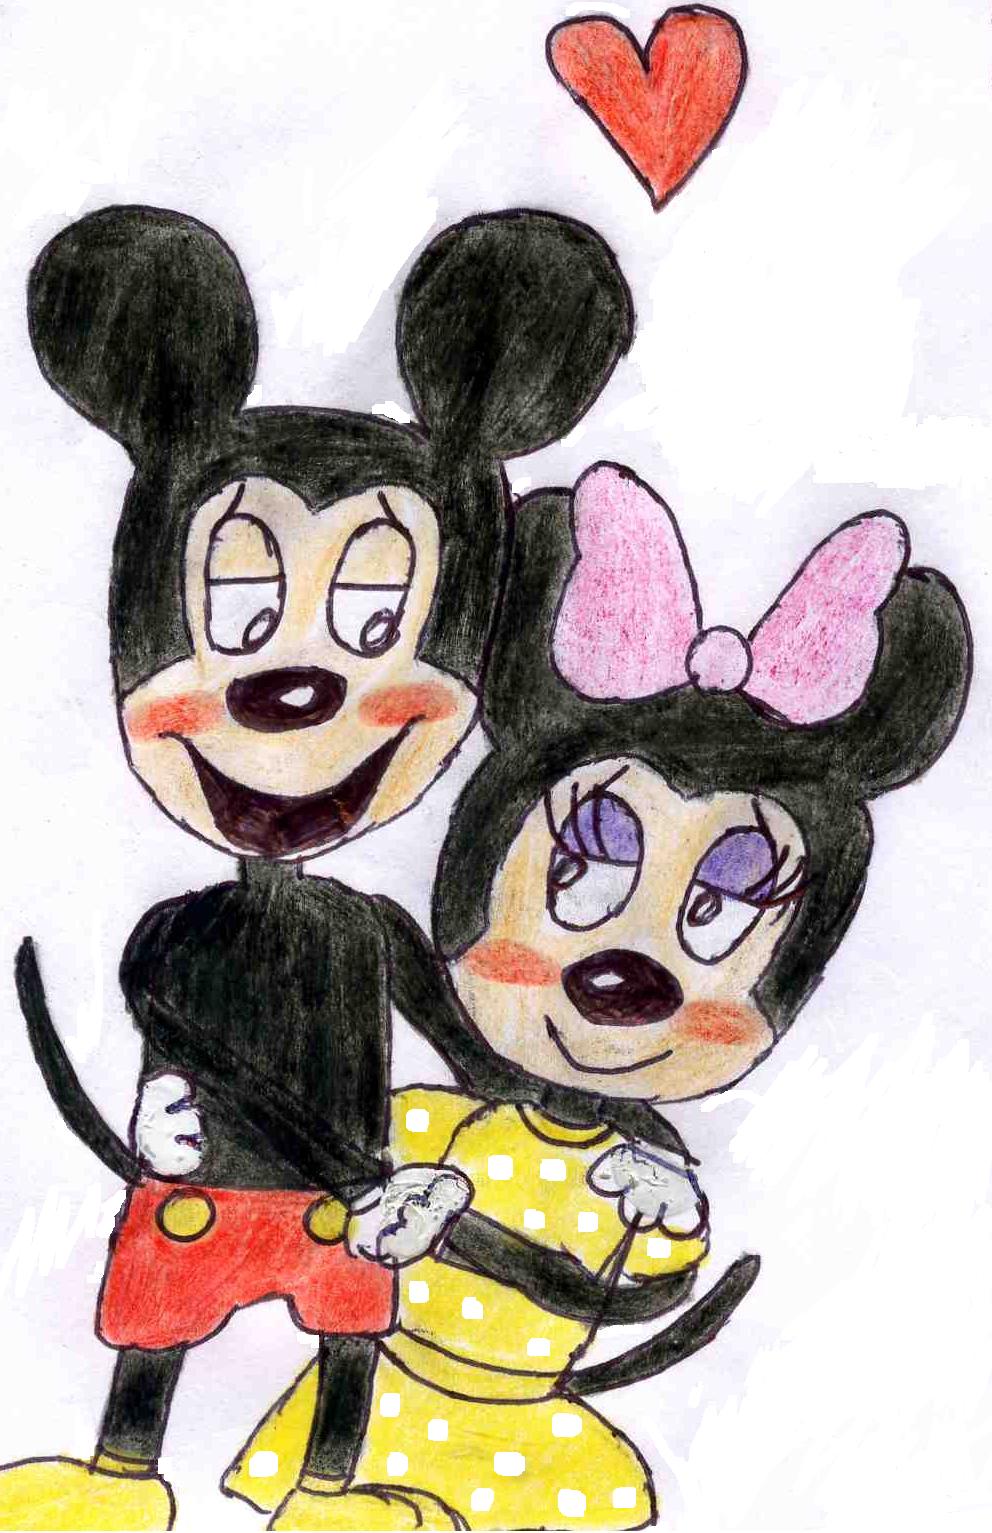 MickeyxMinnie mouse by Mandarin123